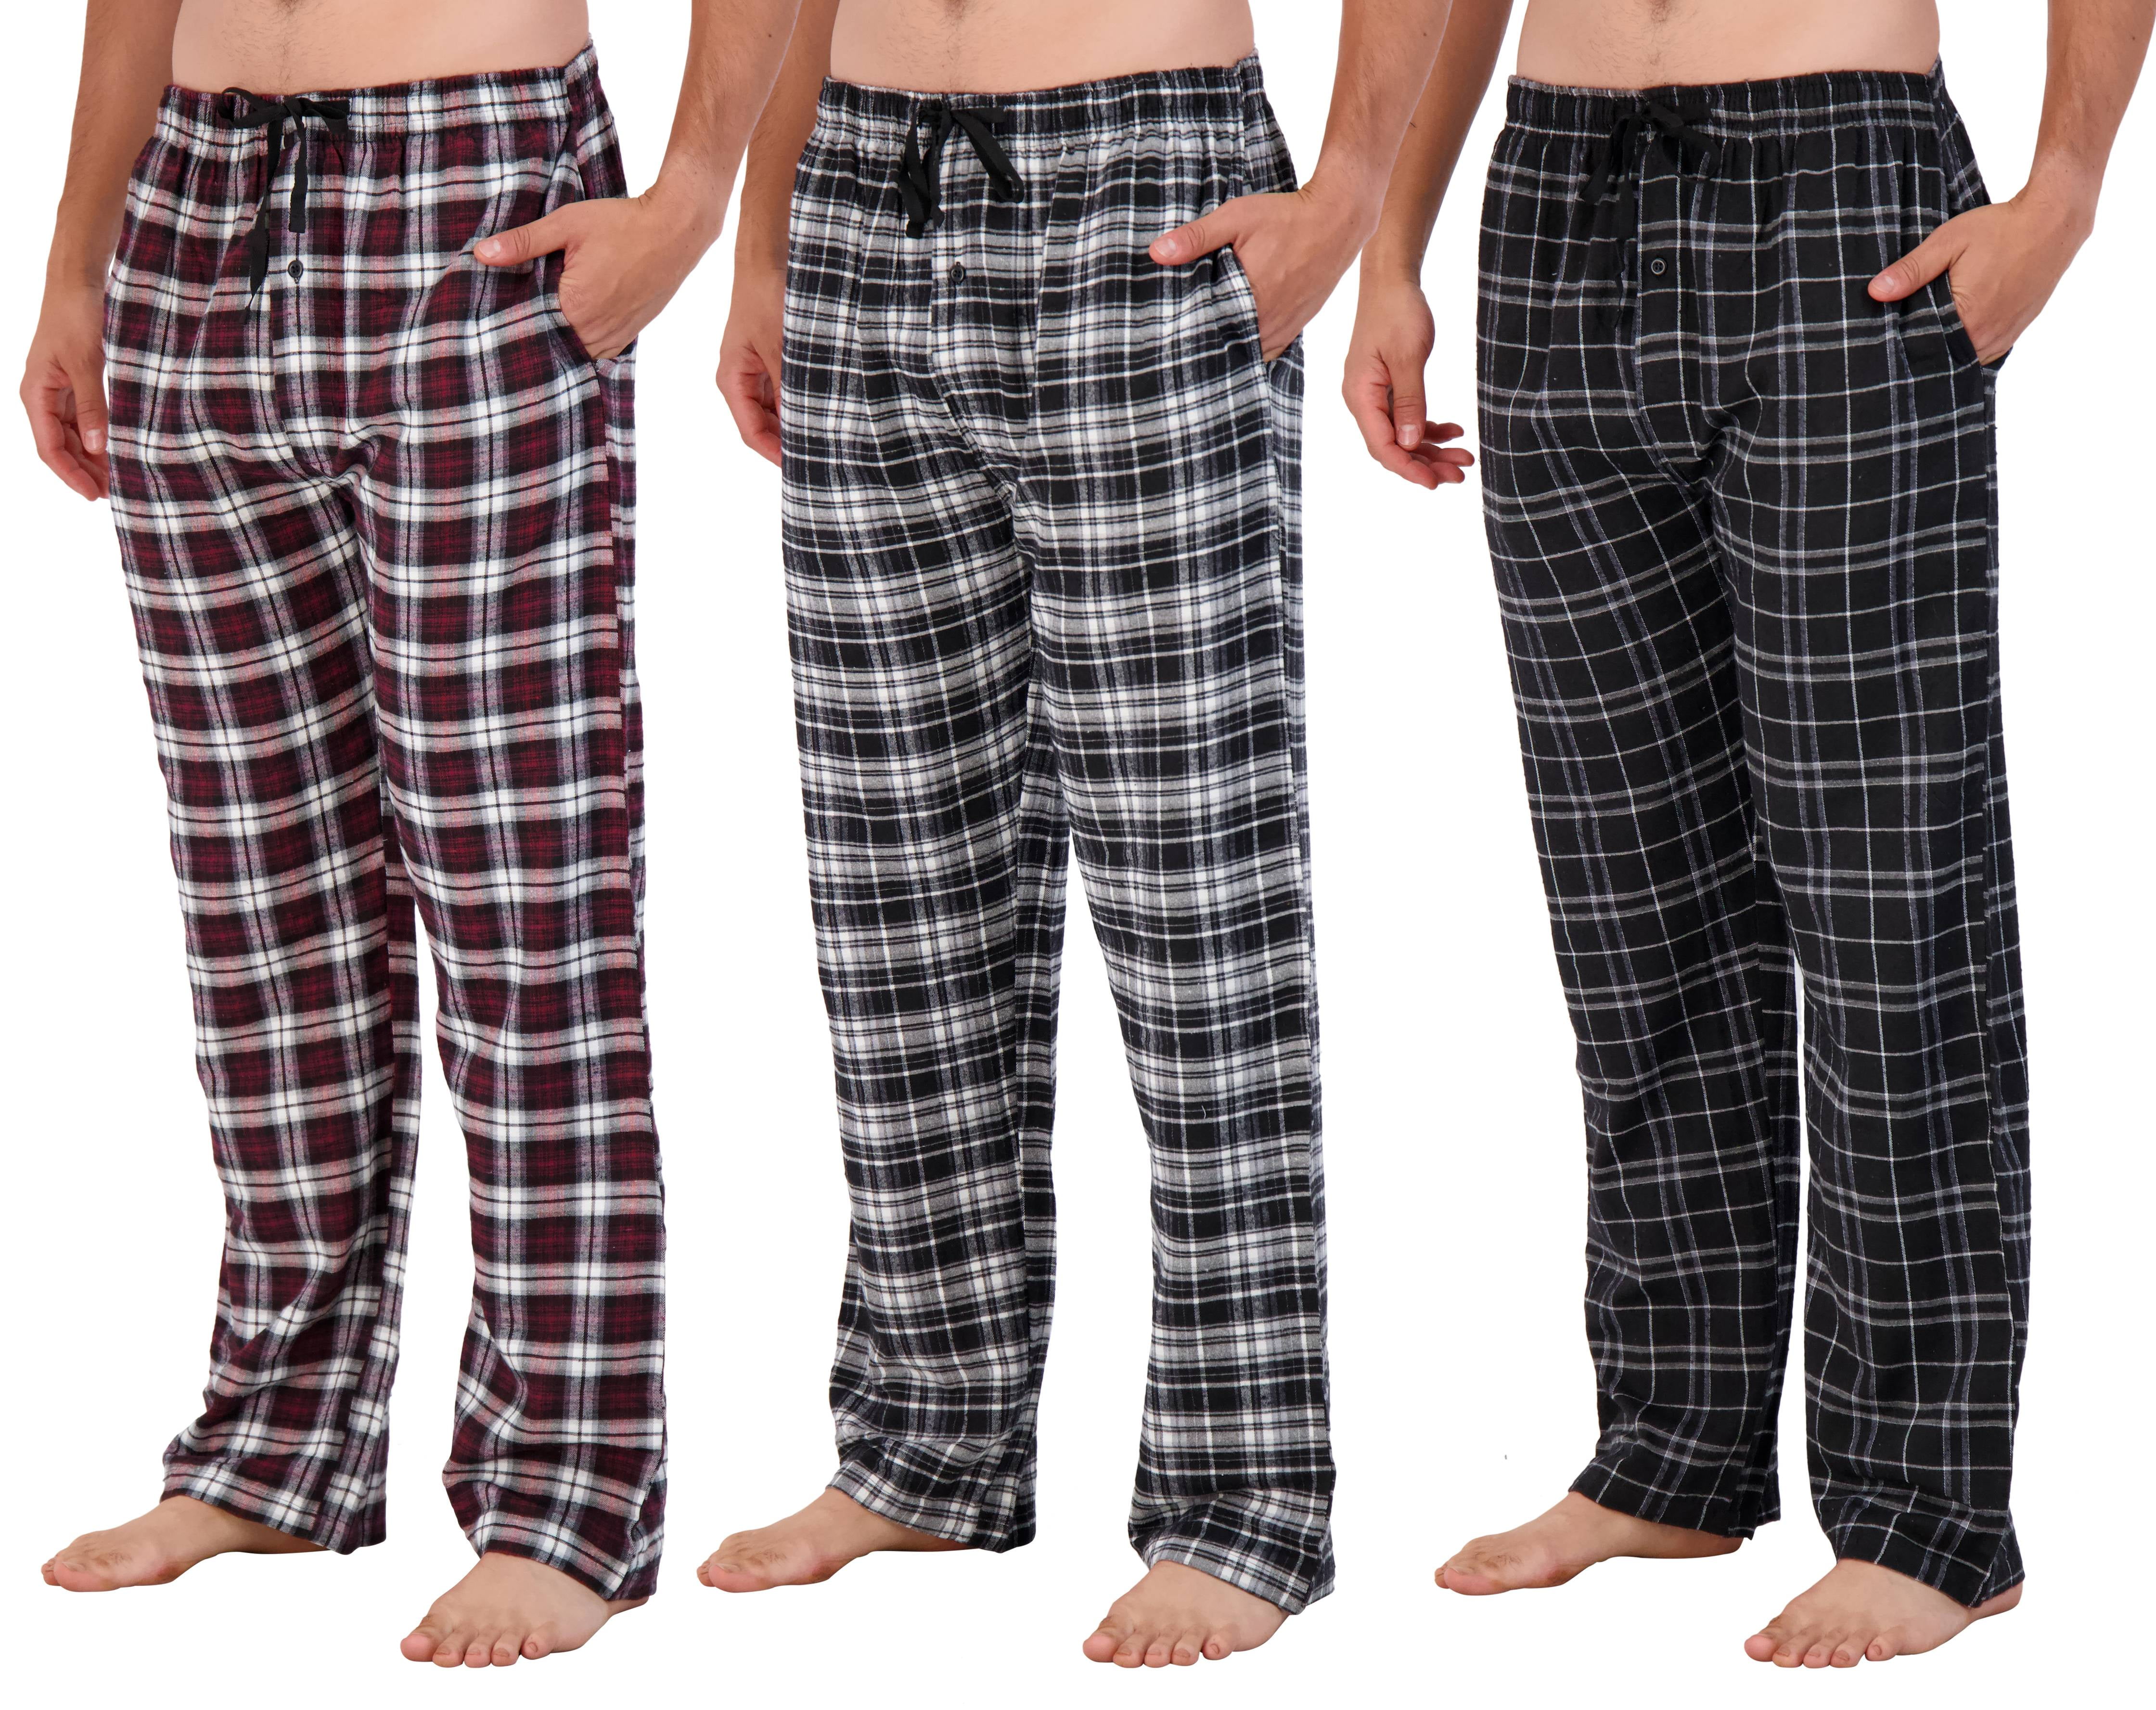 3 Pack Mens Knit Cotton Flannel Plaid Lounge Bottoms with Button Fly S-3XL Mens Pajama Pants 